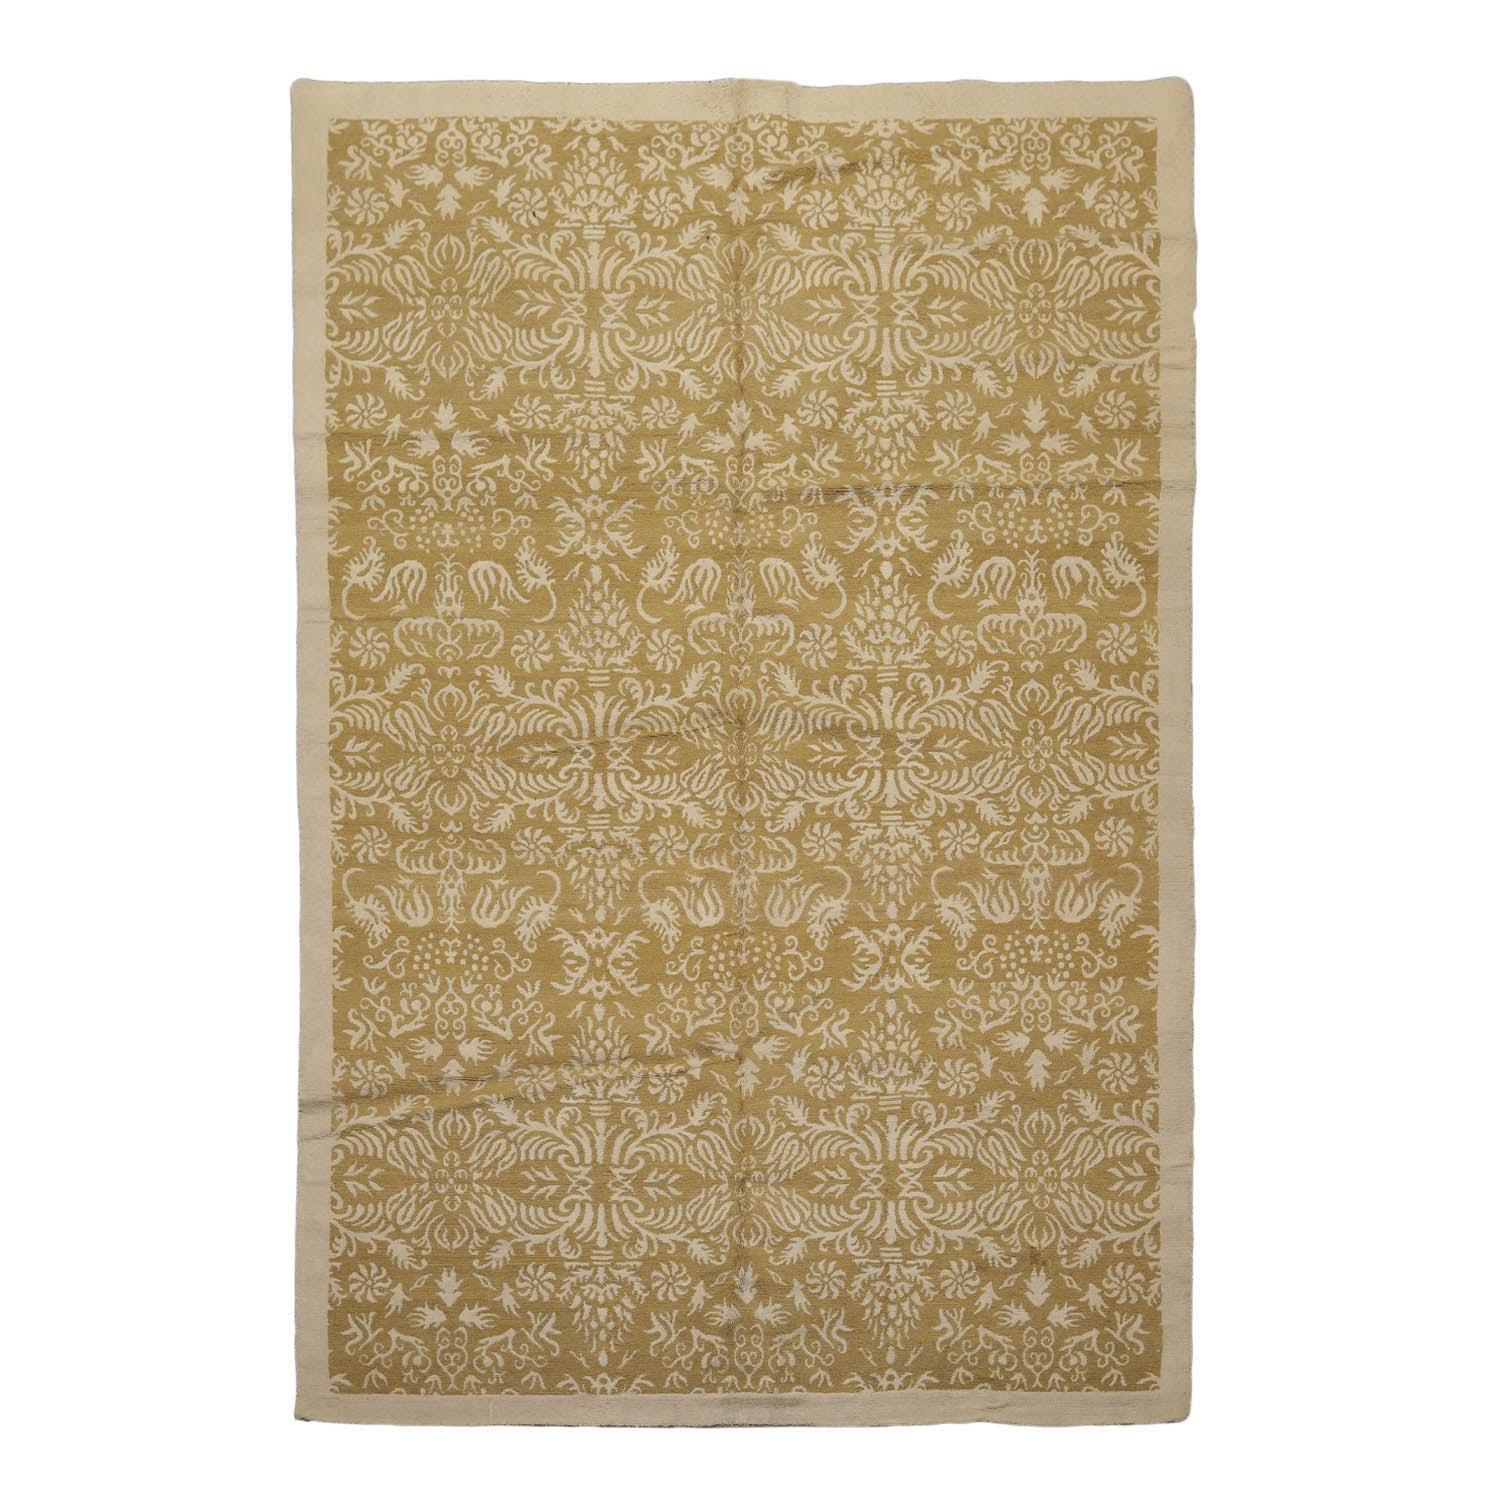 Anoeska 6x9 Hand Knotted Tibetan Wool and Silk Lapchi Transitional Oriental Area Rug Green, Light Gold Color